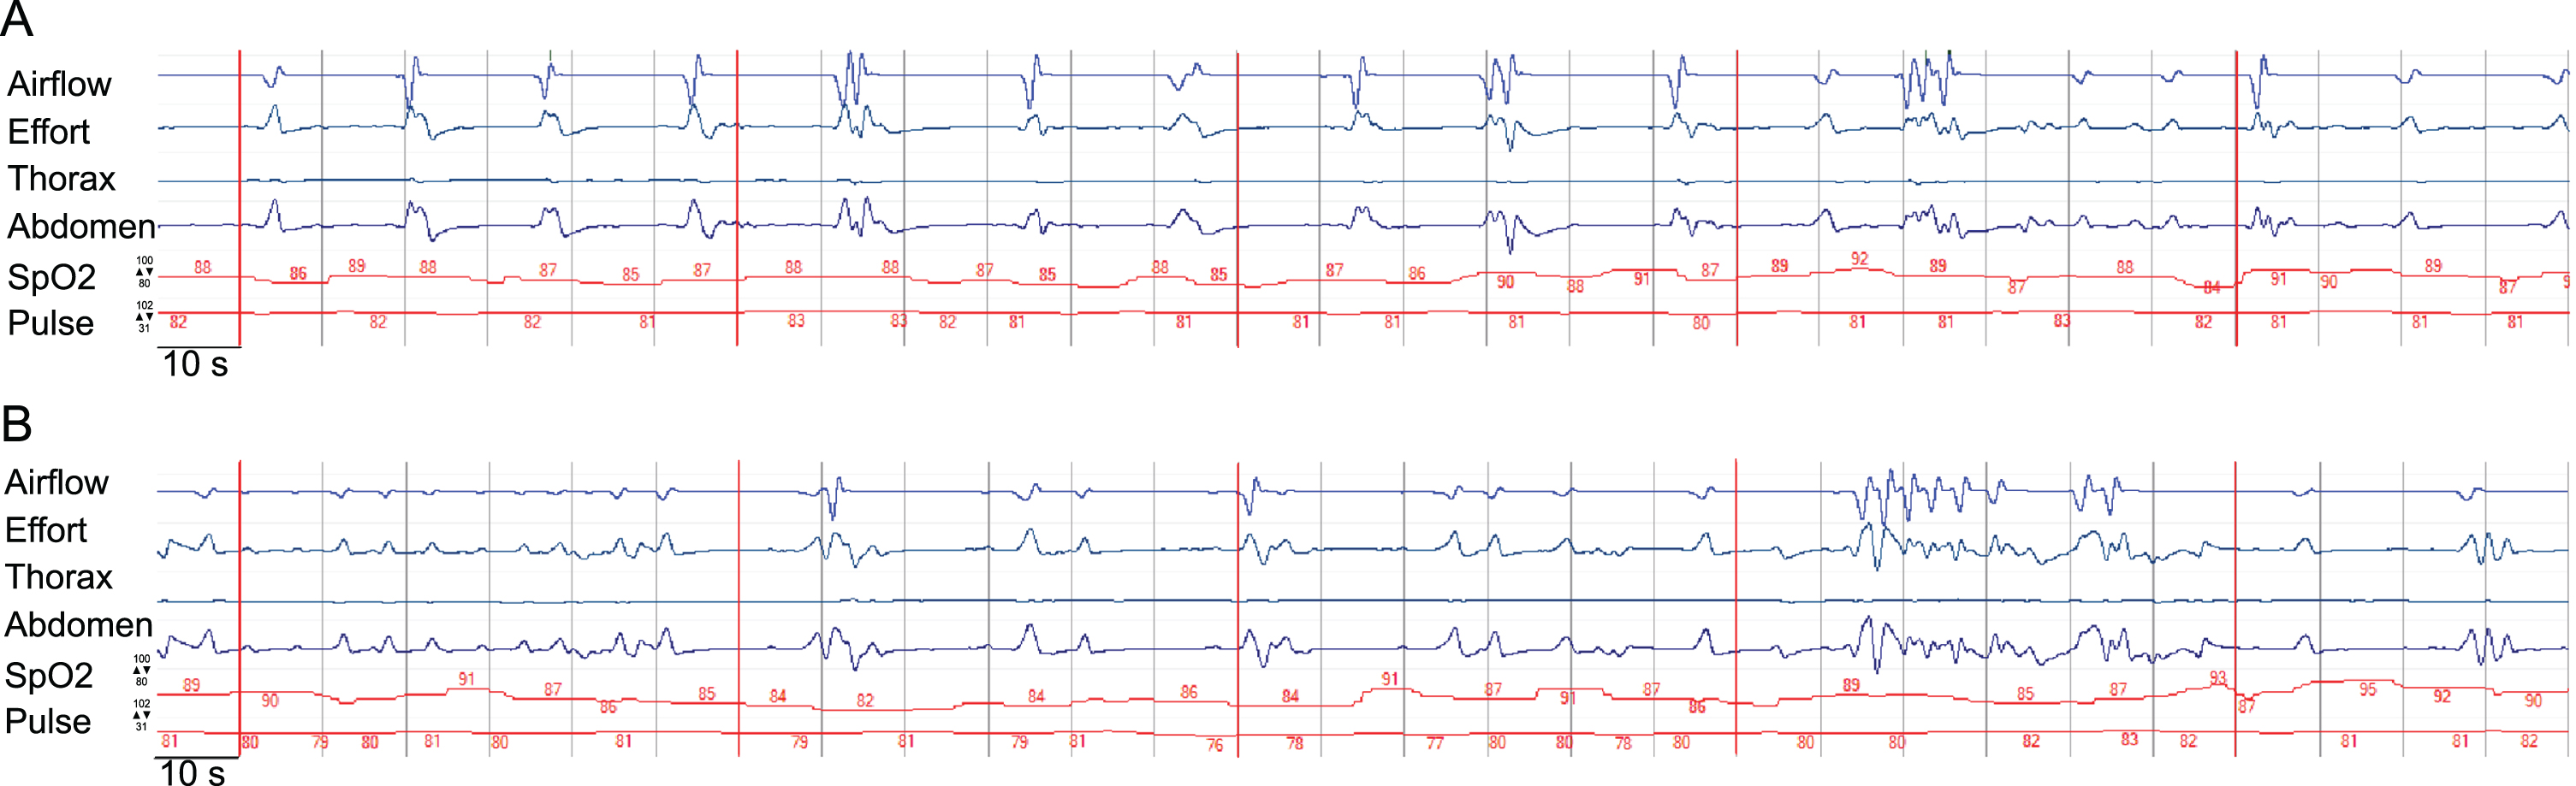 Display of an episode of the polygraphic recording showcasing central bradypnea. The time interval from one to another vertical line is 10s, the interval between two neighboring vertical red lines marks a 60s timeframe. The default range of the measurement of SpO2 and heart rate of the pictured measurement is given with respect to the upper and lower limit. SpO2 is displayed as a percentage, pulse as numbers of heart rate in beats per minute. The categories airflow, effort, thorax(-movement), abdomen(-movement) and activity are displayed in arbitrary units. Section a) demonstrates bradypnea and prolonged expiration, section b) demonstrates irregular variability of breathing effort and timing, consistent with ataxic (“Biot's”) breathing. The participant provided an informed consent to publish health data including polygraphic data.